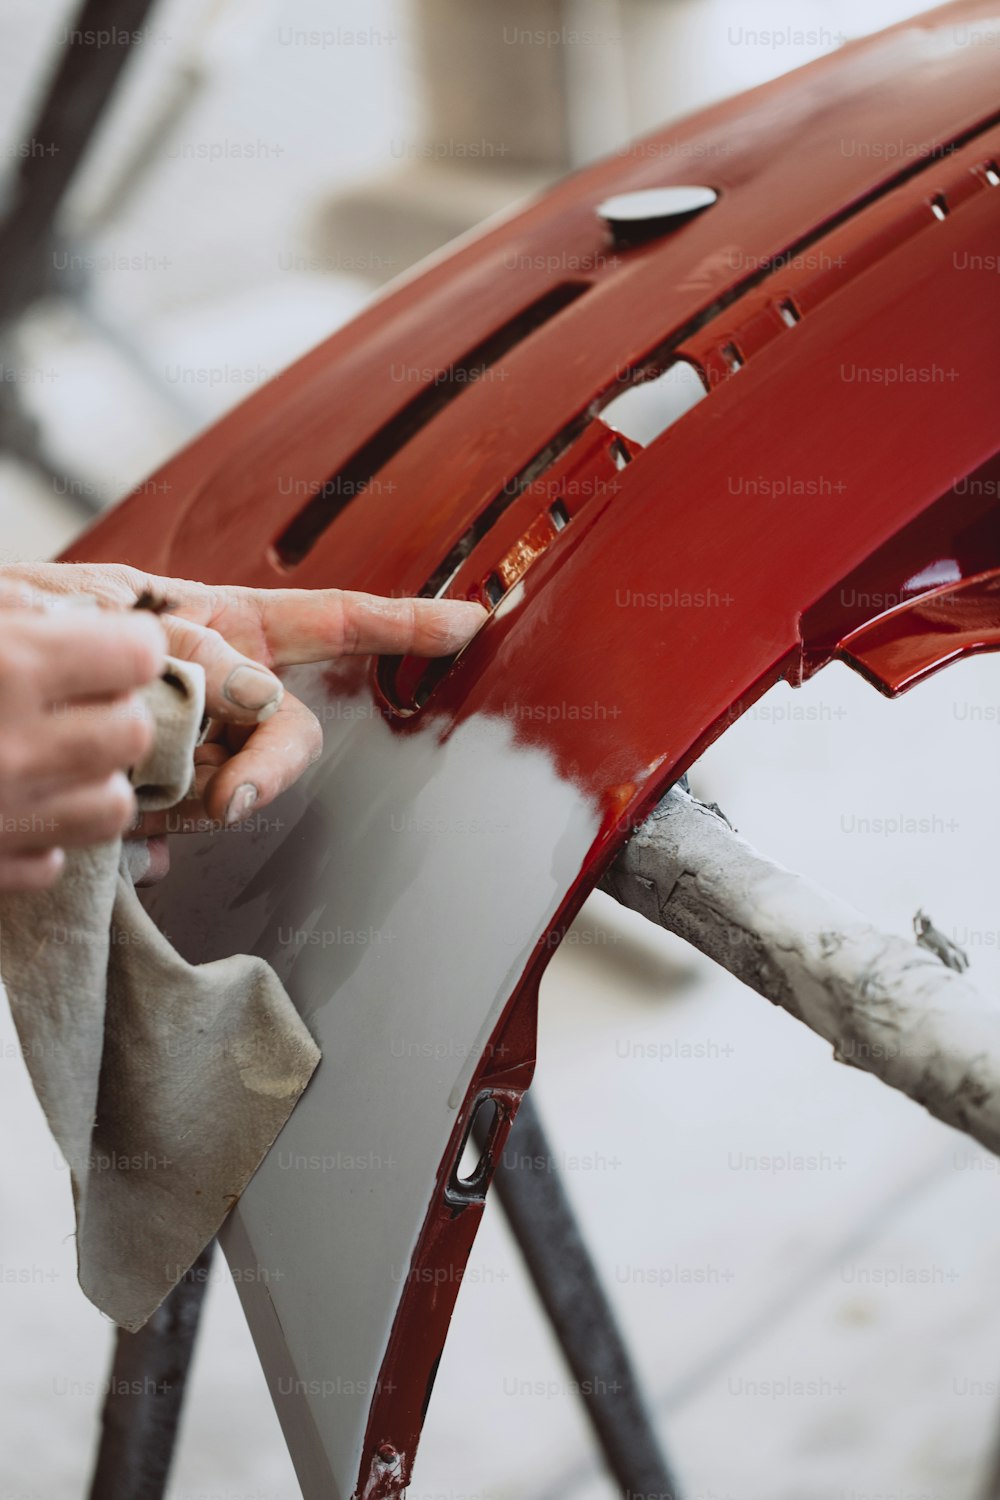 Car detailing - Man with sandpaper in auto repair shop sanding polishing and preparing car parts for painting. Selective focus on man's hand.